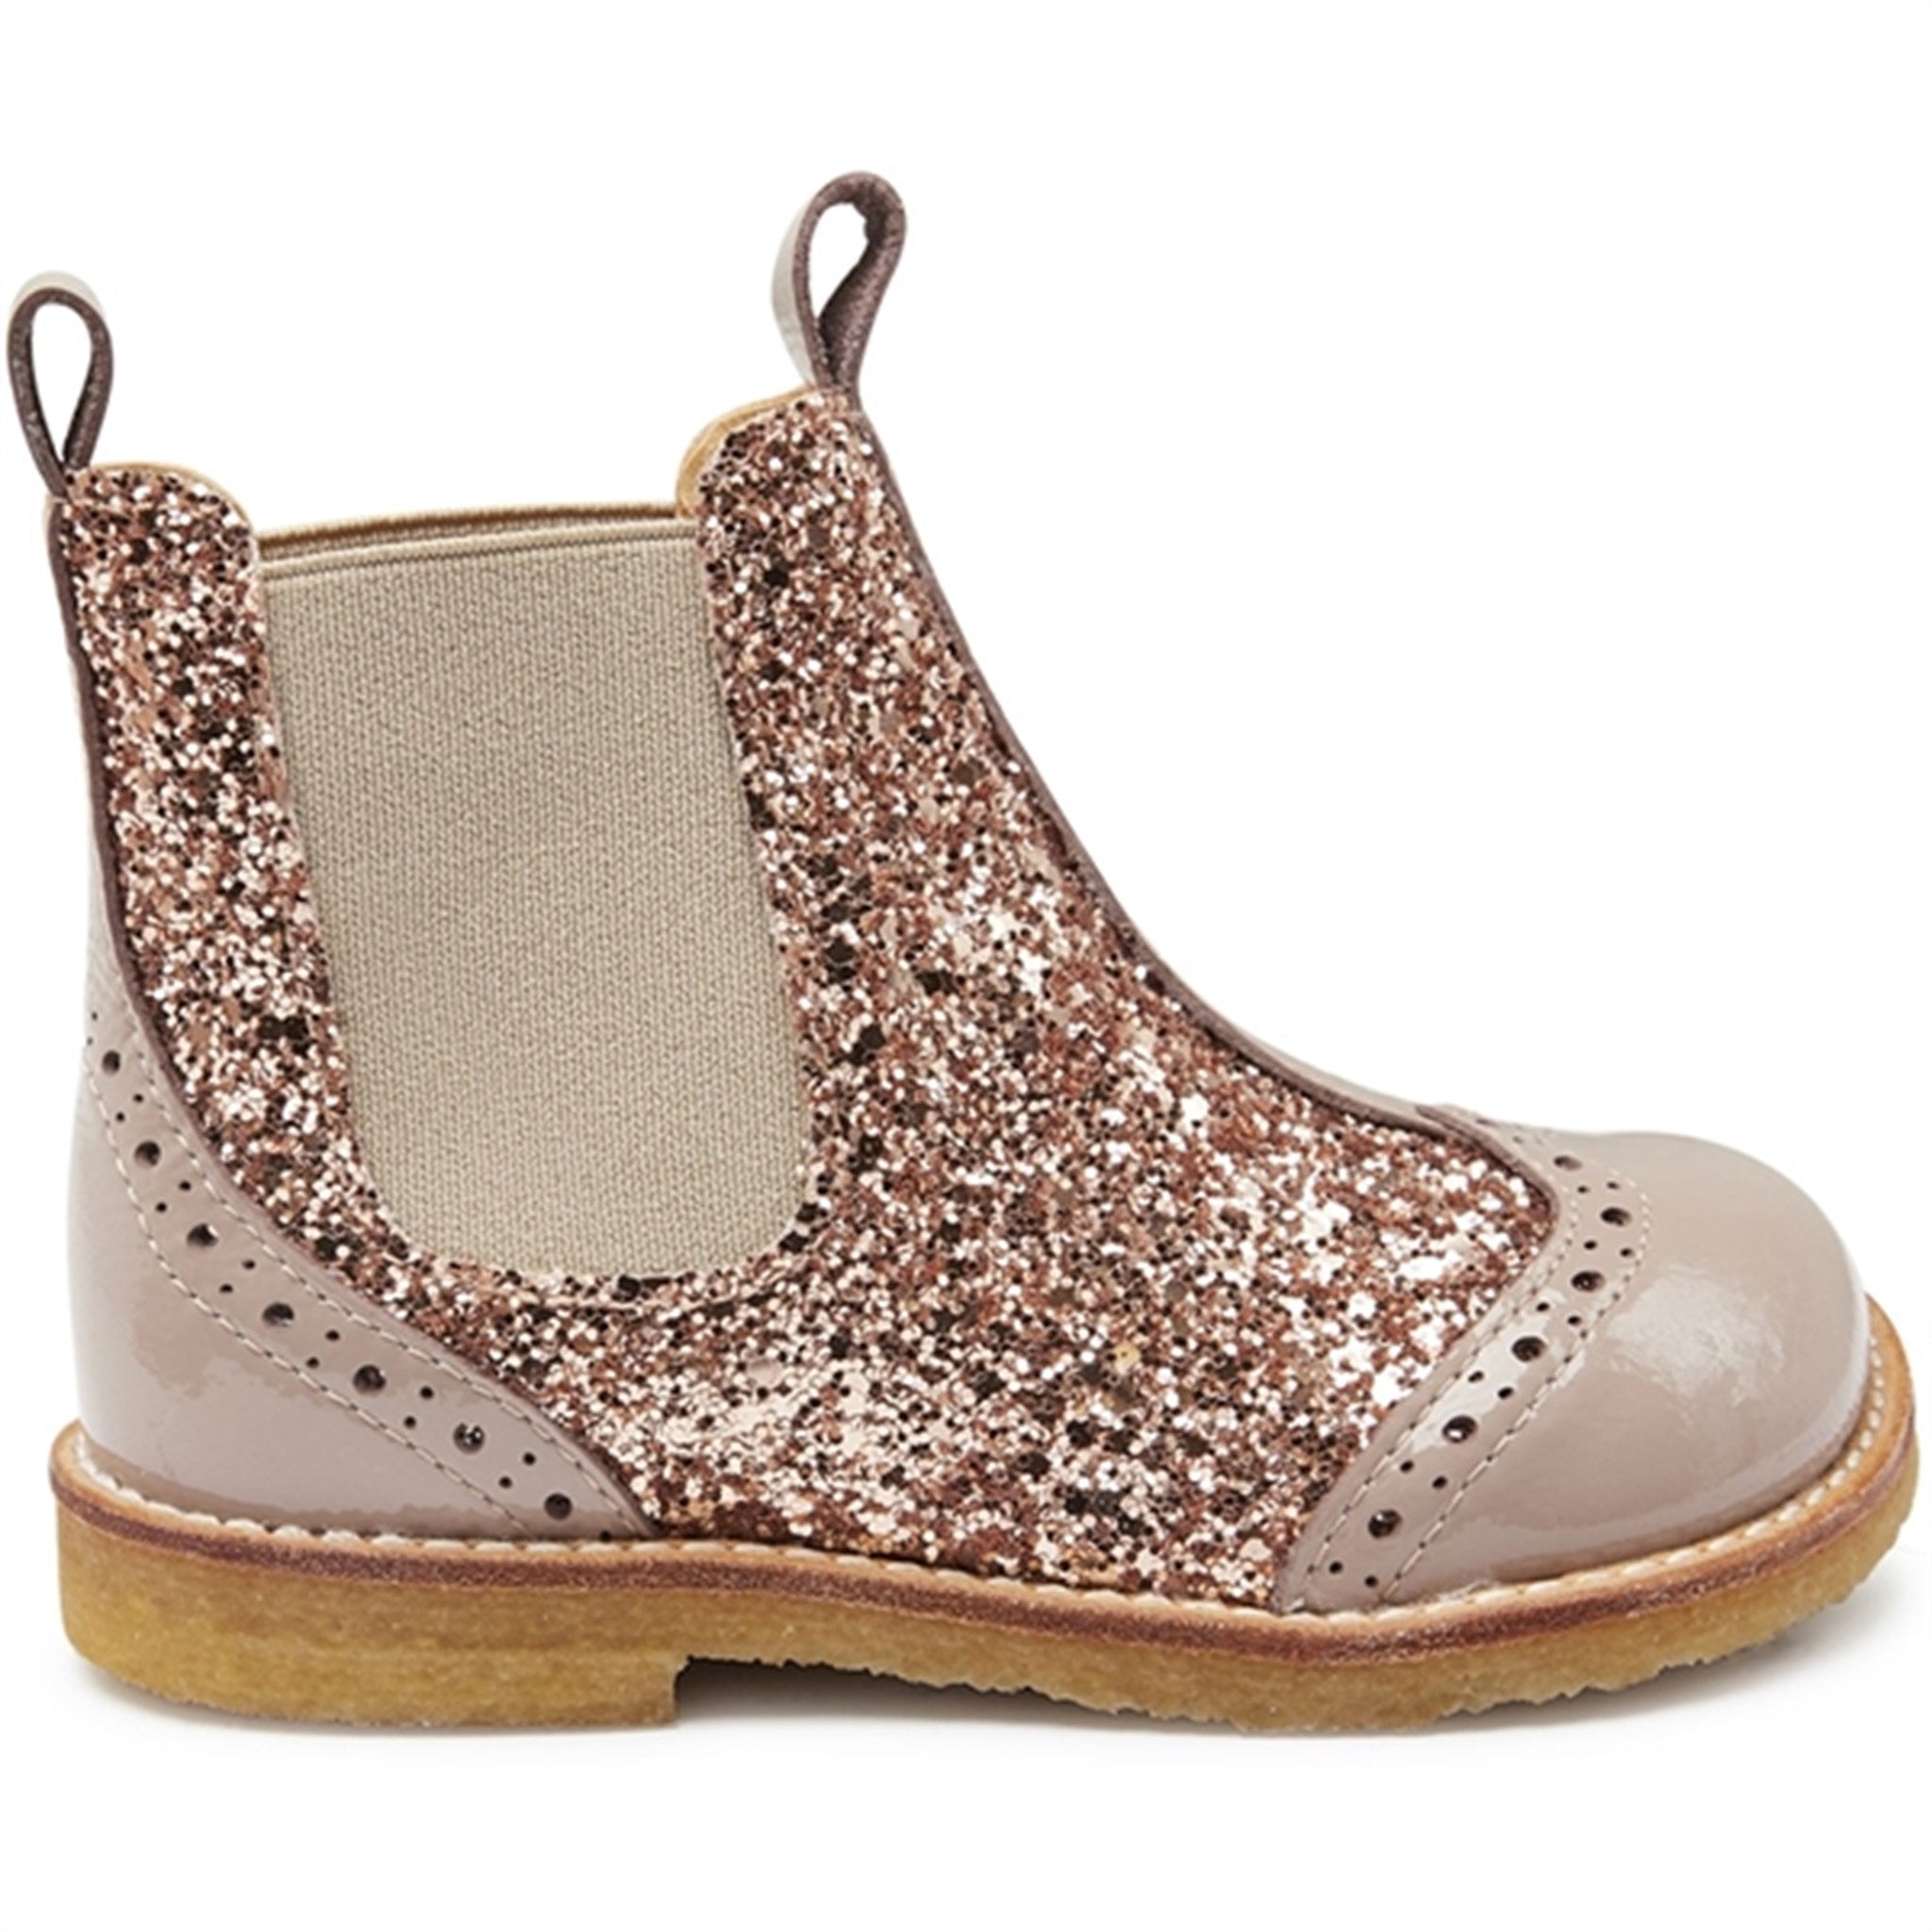 Angulus Chelsea Boots With Glitter Dusty Almond/Maple Glitter/Elastic 2